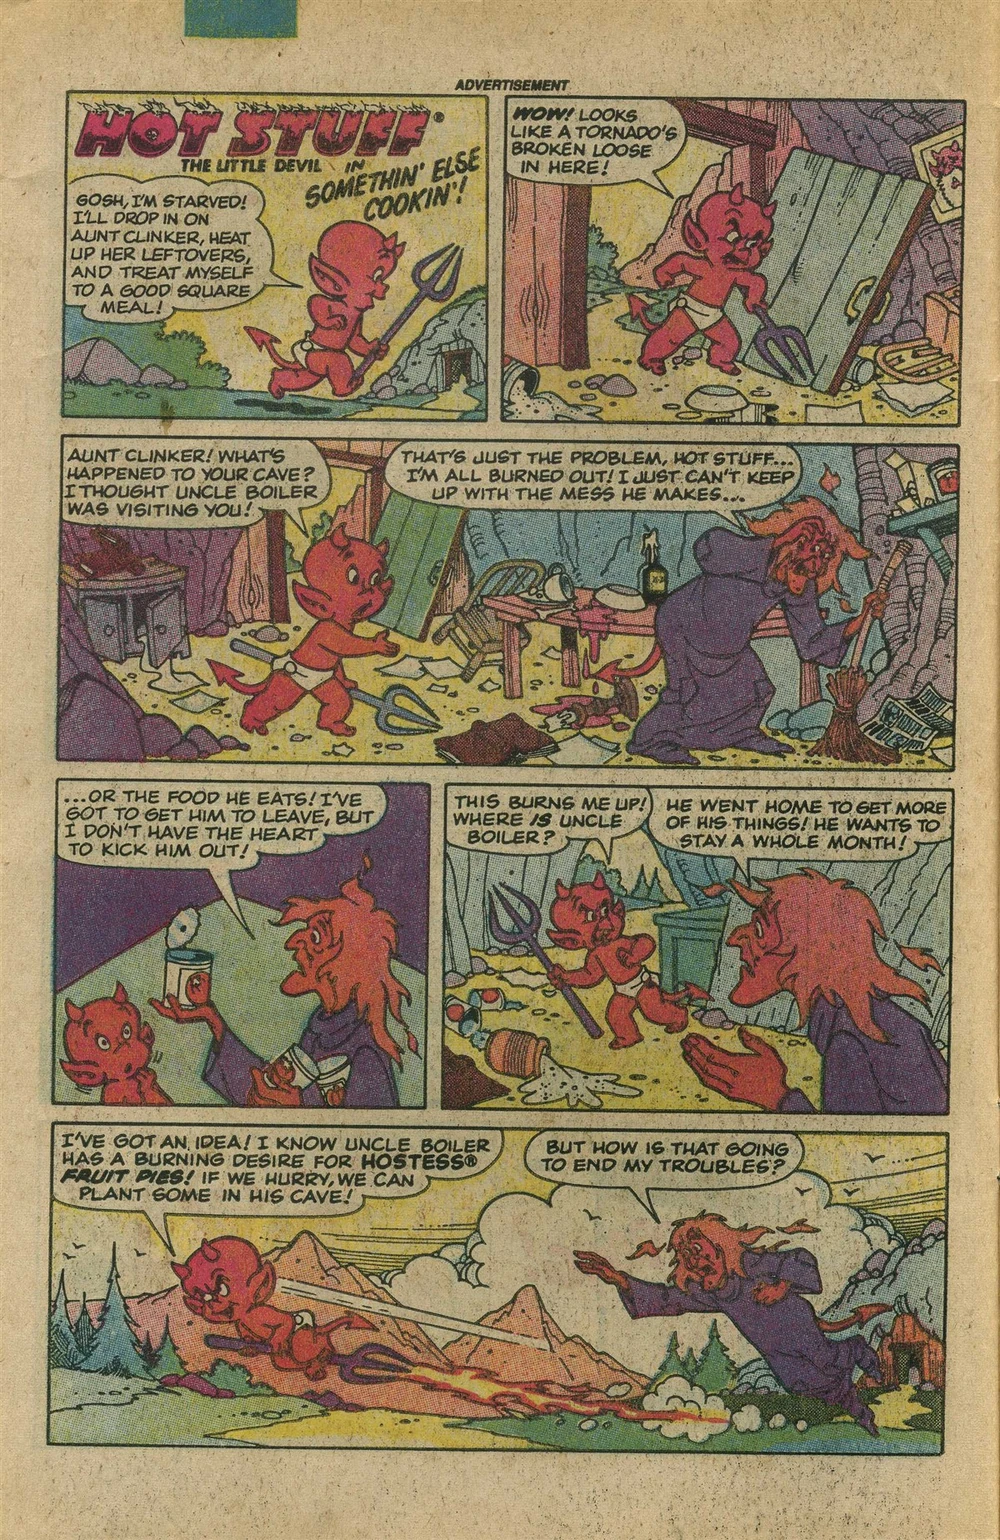 Hostess Comic Ad - Somethin' Else Cookin'! - Page 1